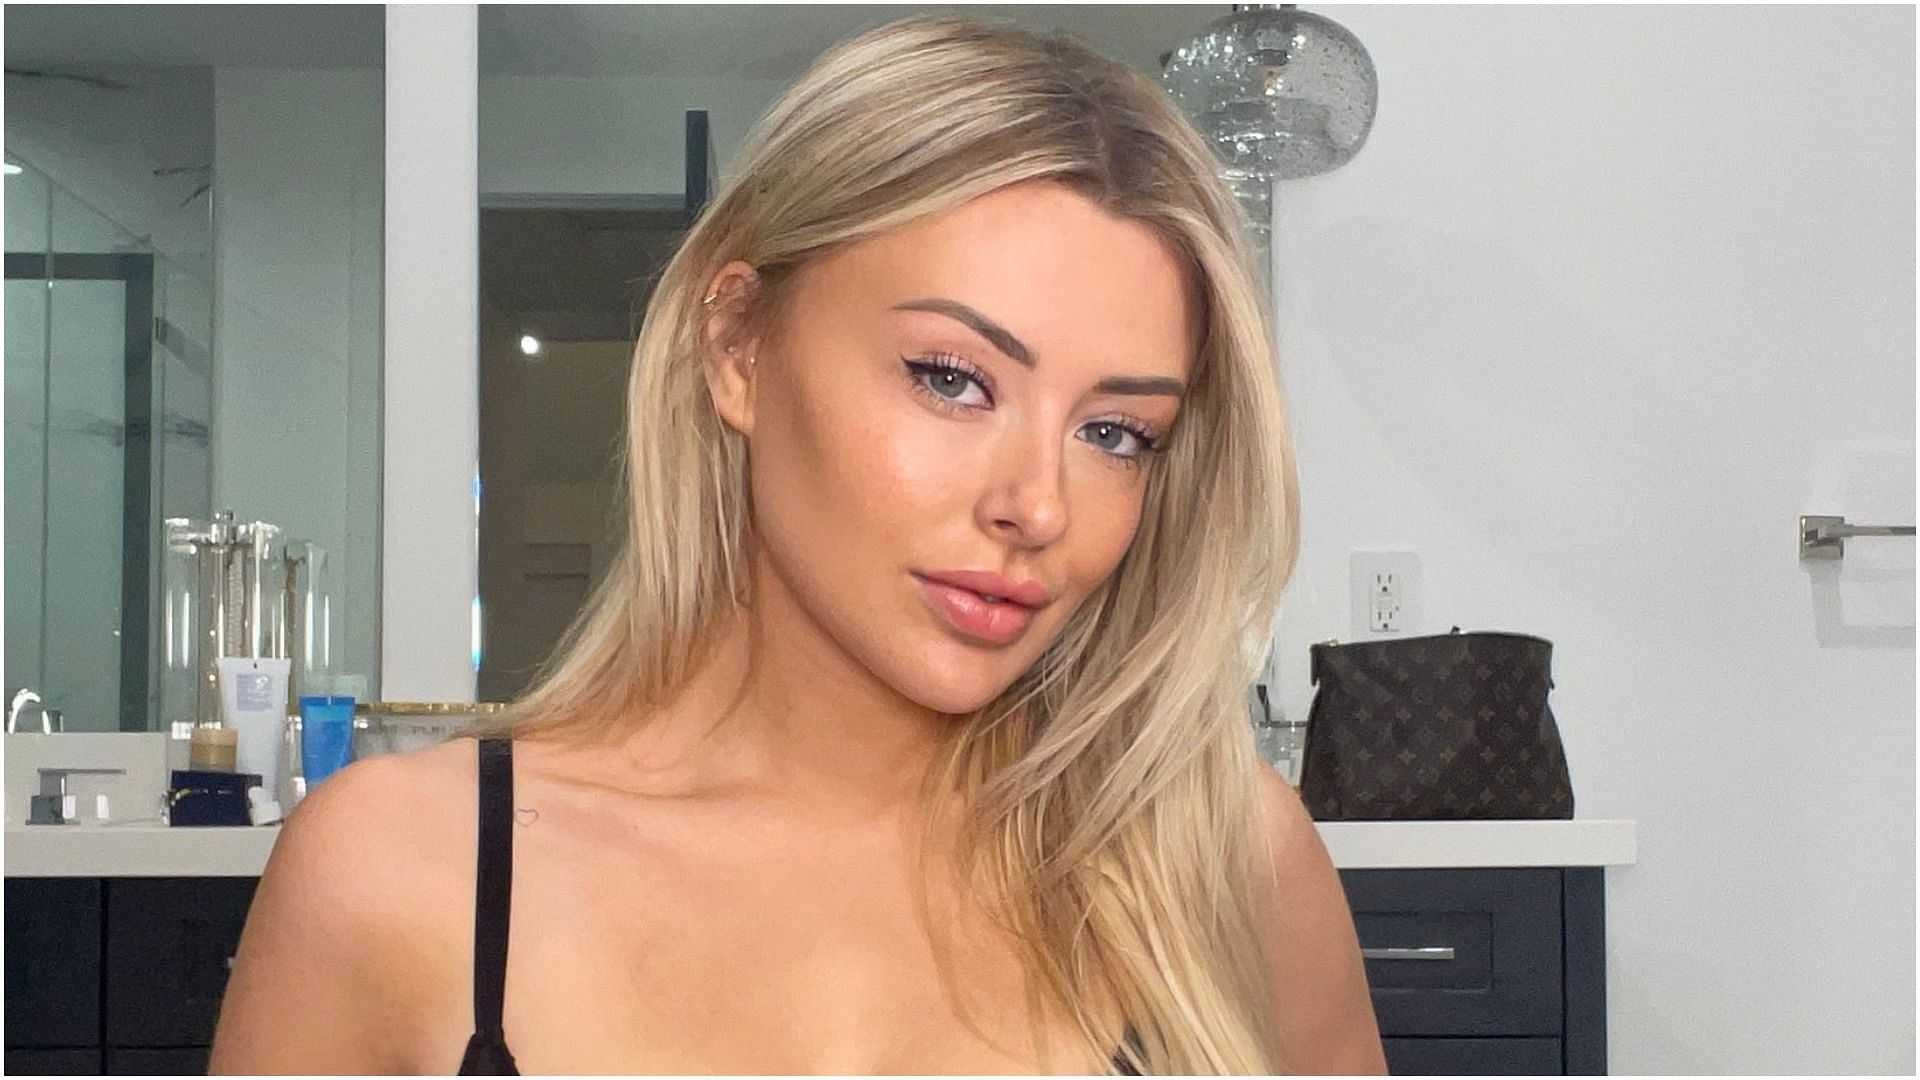 Corinna Kopf gets unbanned on Twitch after one day